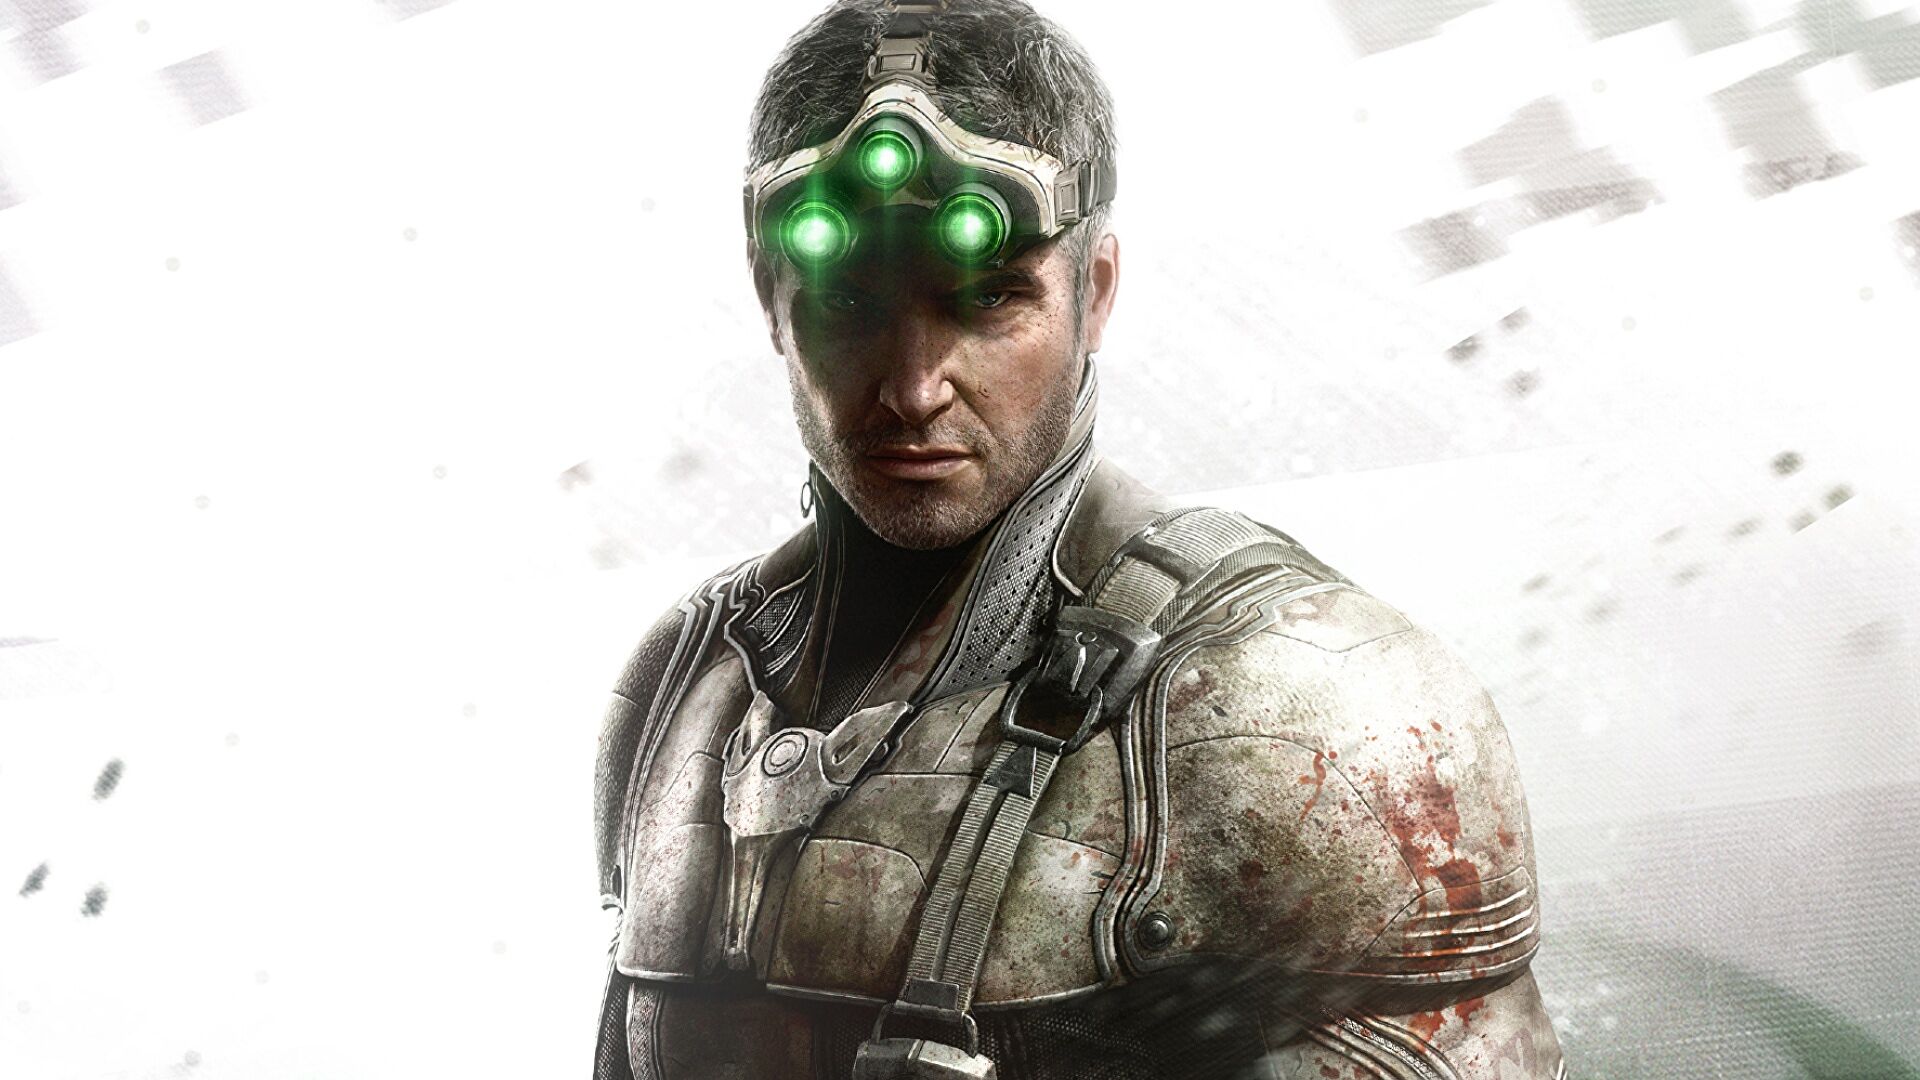 Ubisoft's Splinter Cell remake will be "rewriting and updating" the story for today's players